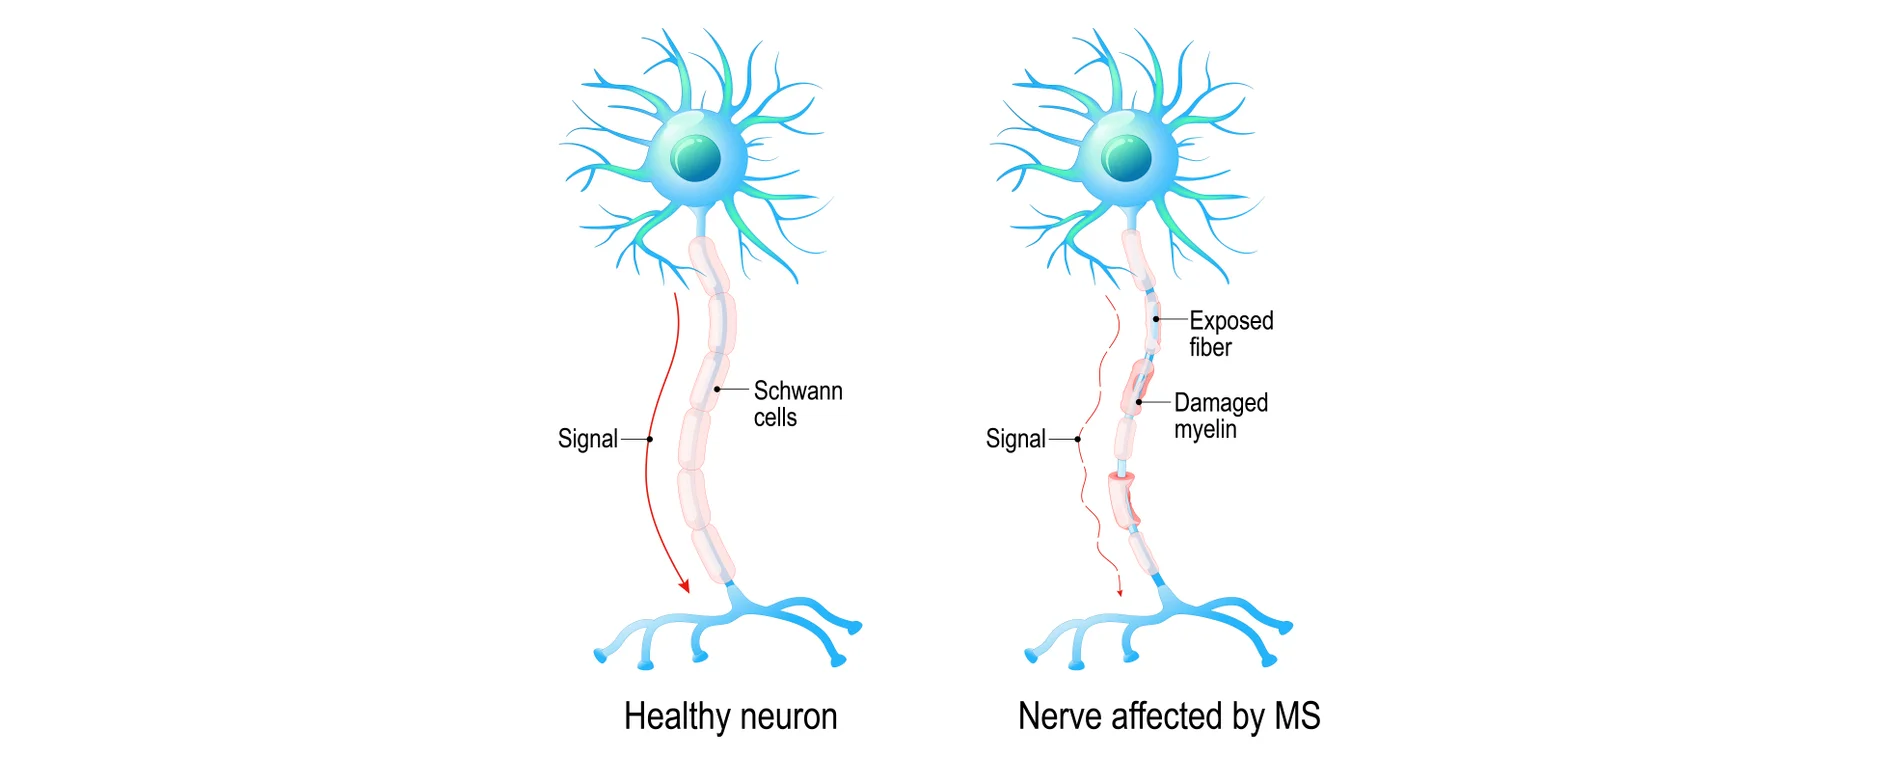 MS or Multiple Sclerosis